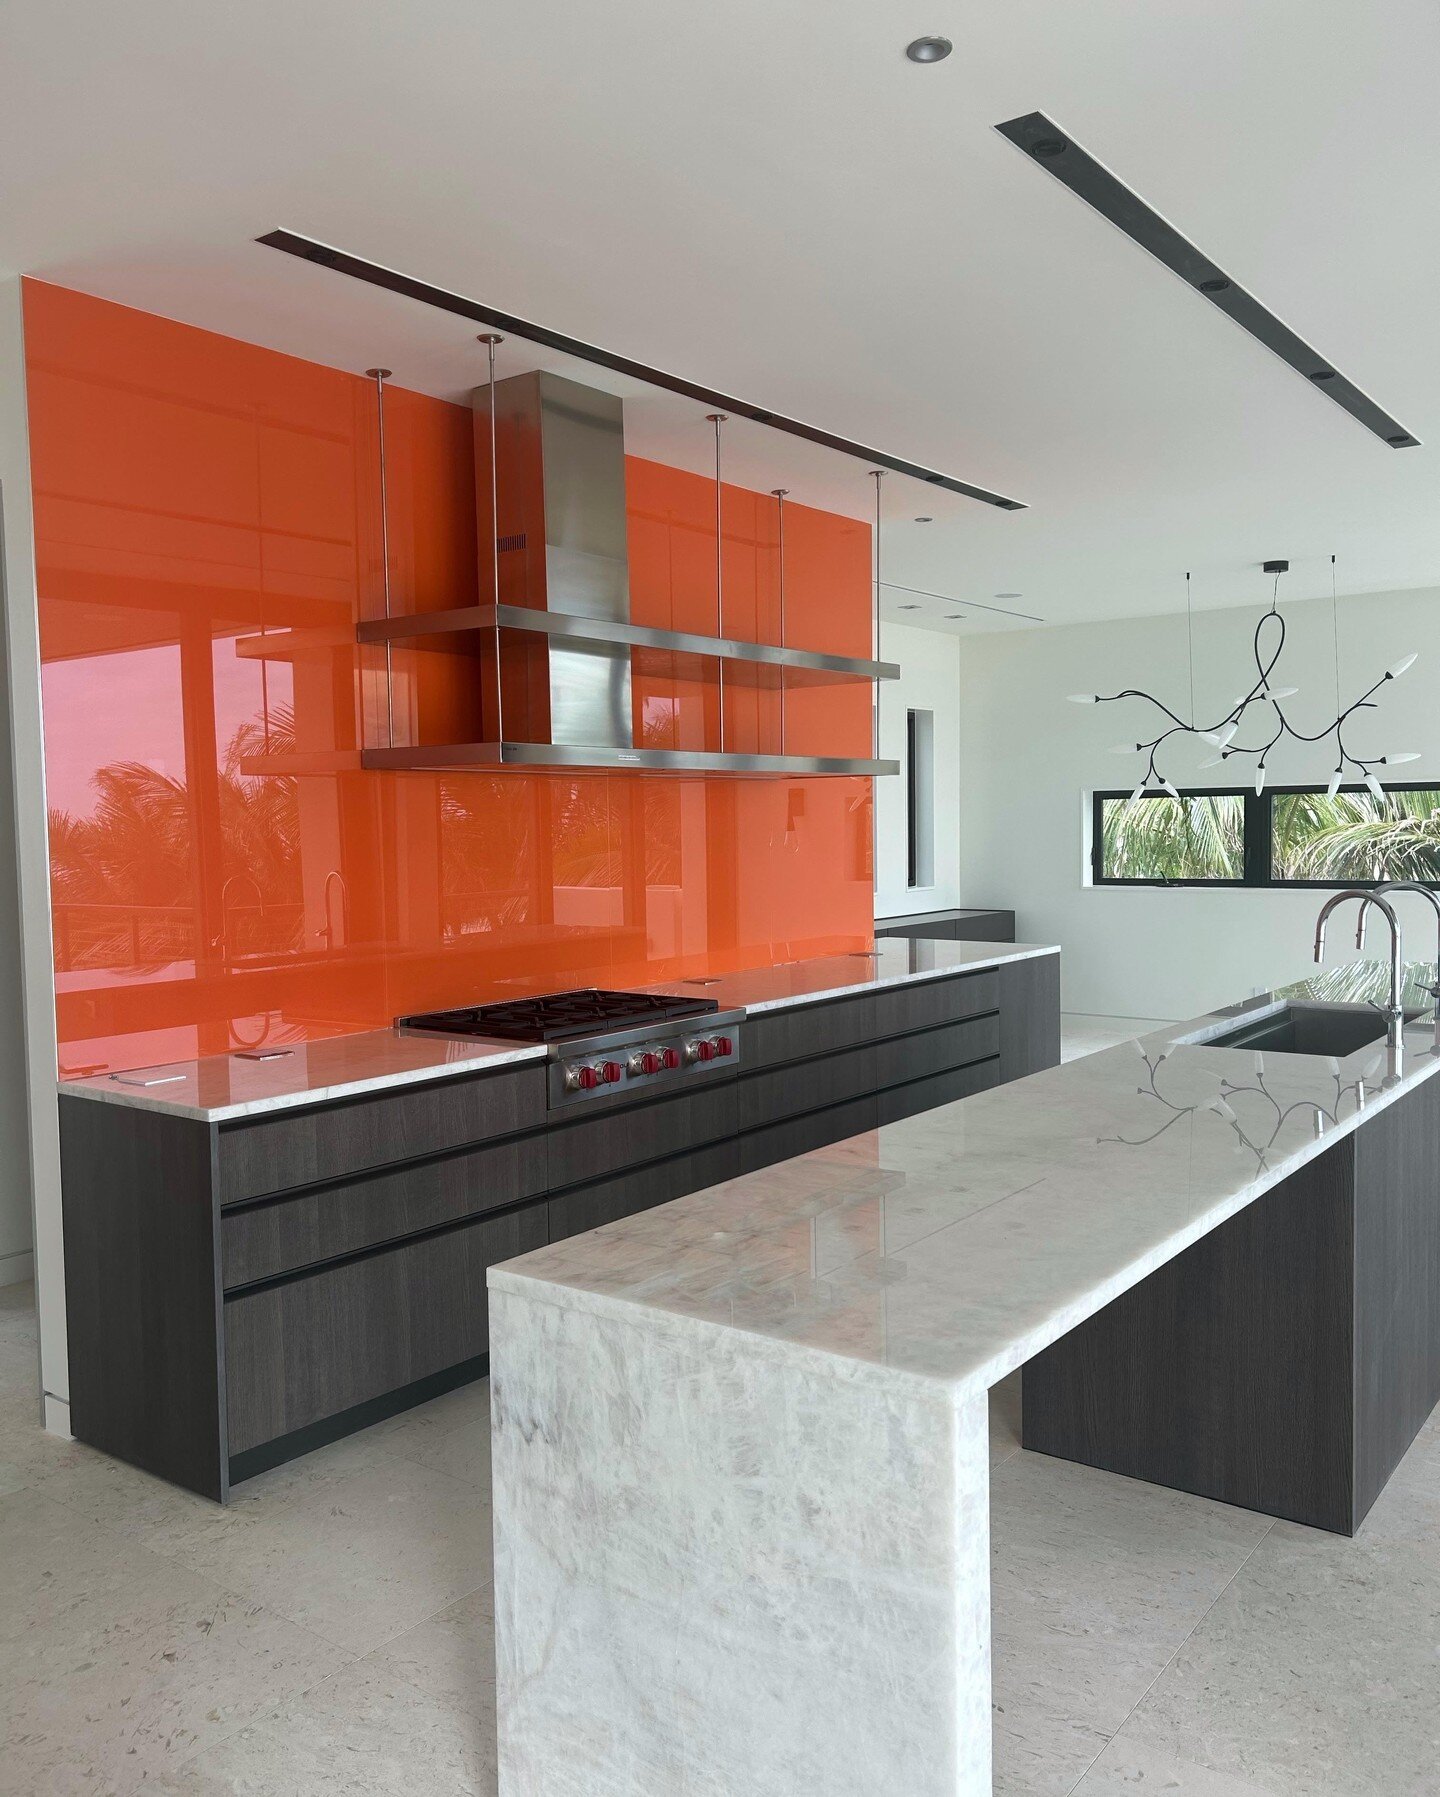 Ignite your culinary passion with a kitchen that's as vibrant as your flavors. A collaboration with @archjowens brings the sleek design of Poliform's My Planet Kitchen System to a private residence on Sanibel Island, fusing fiery orange hues with the